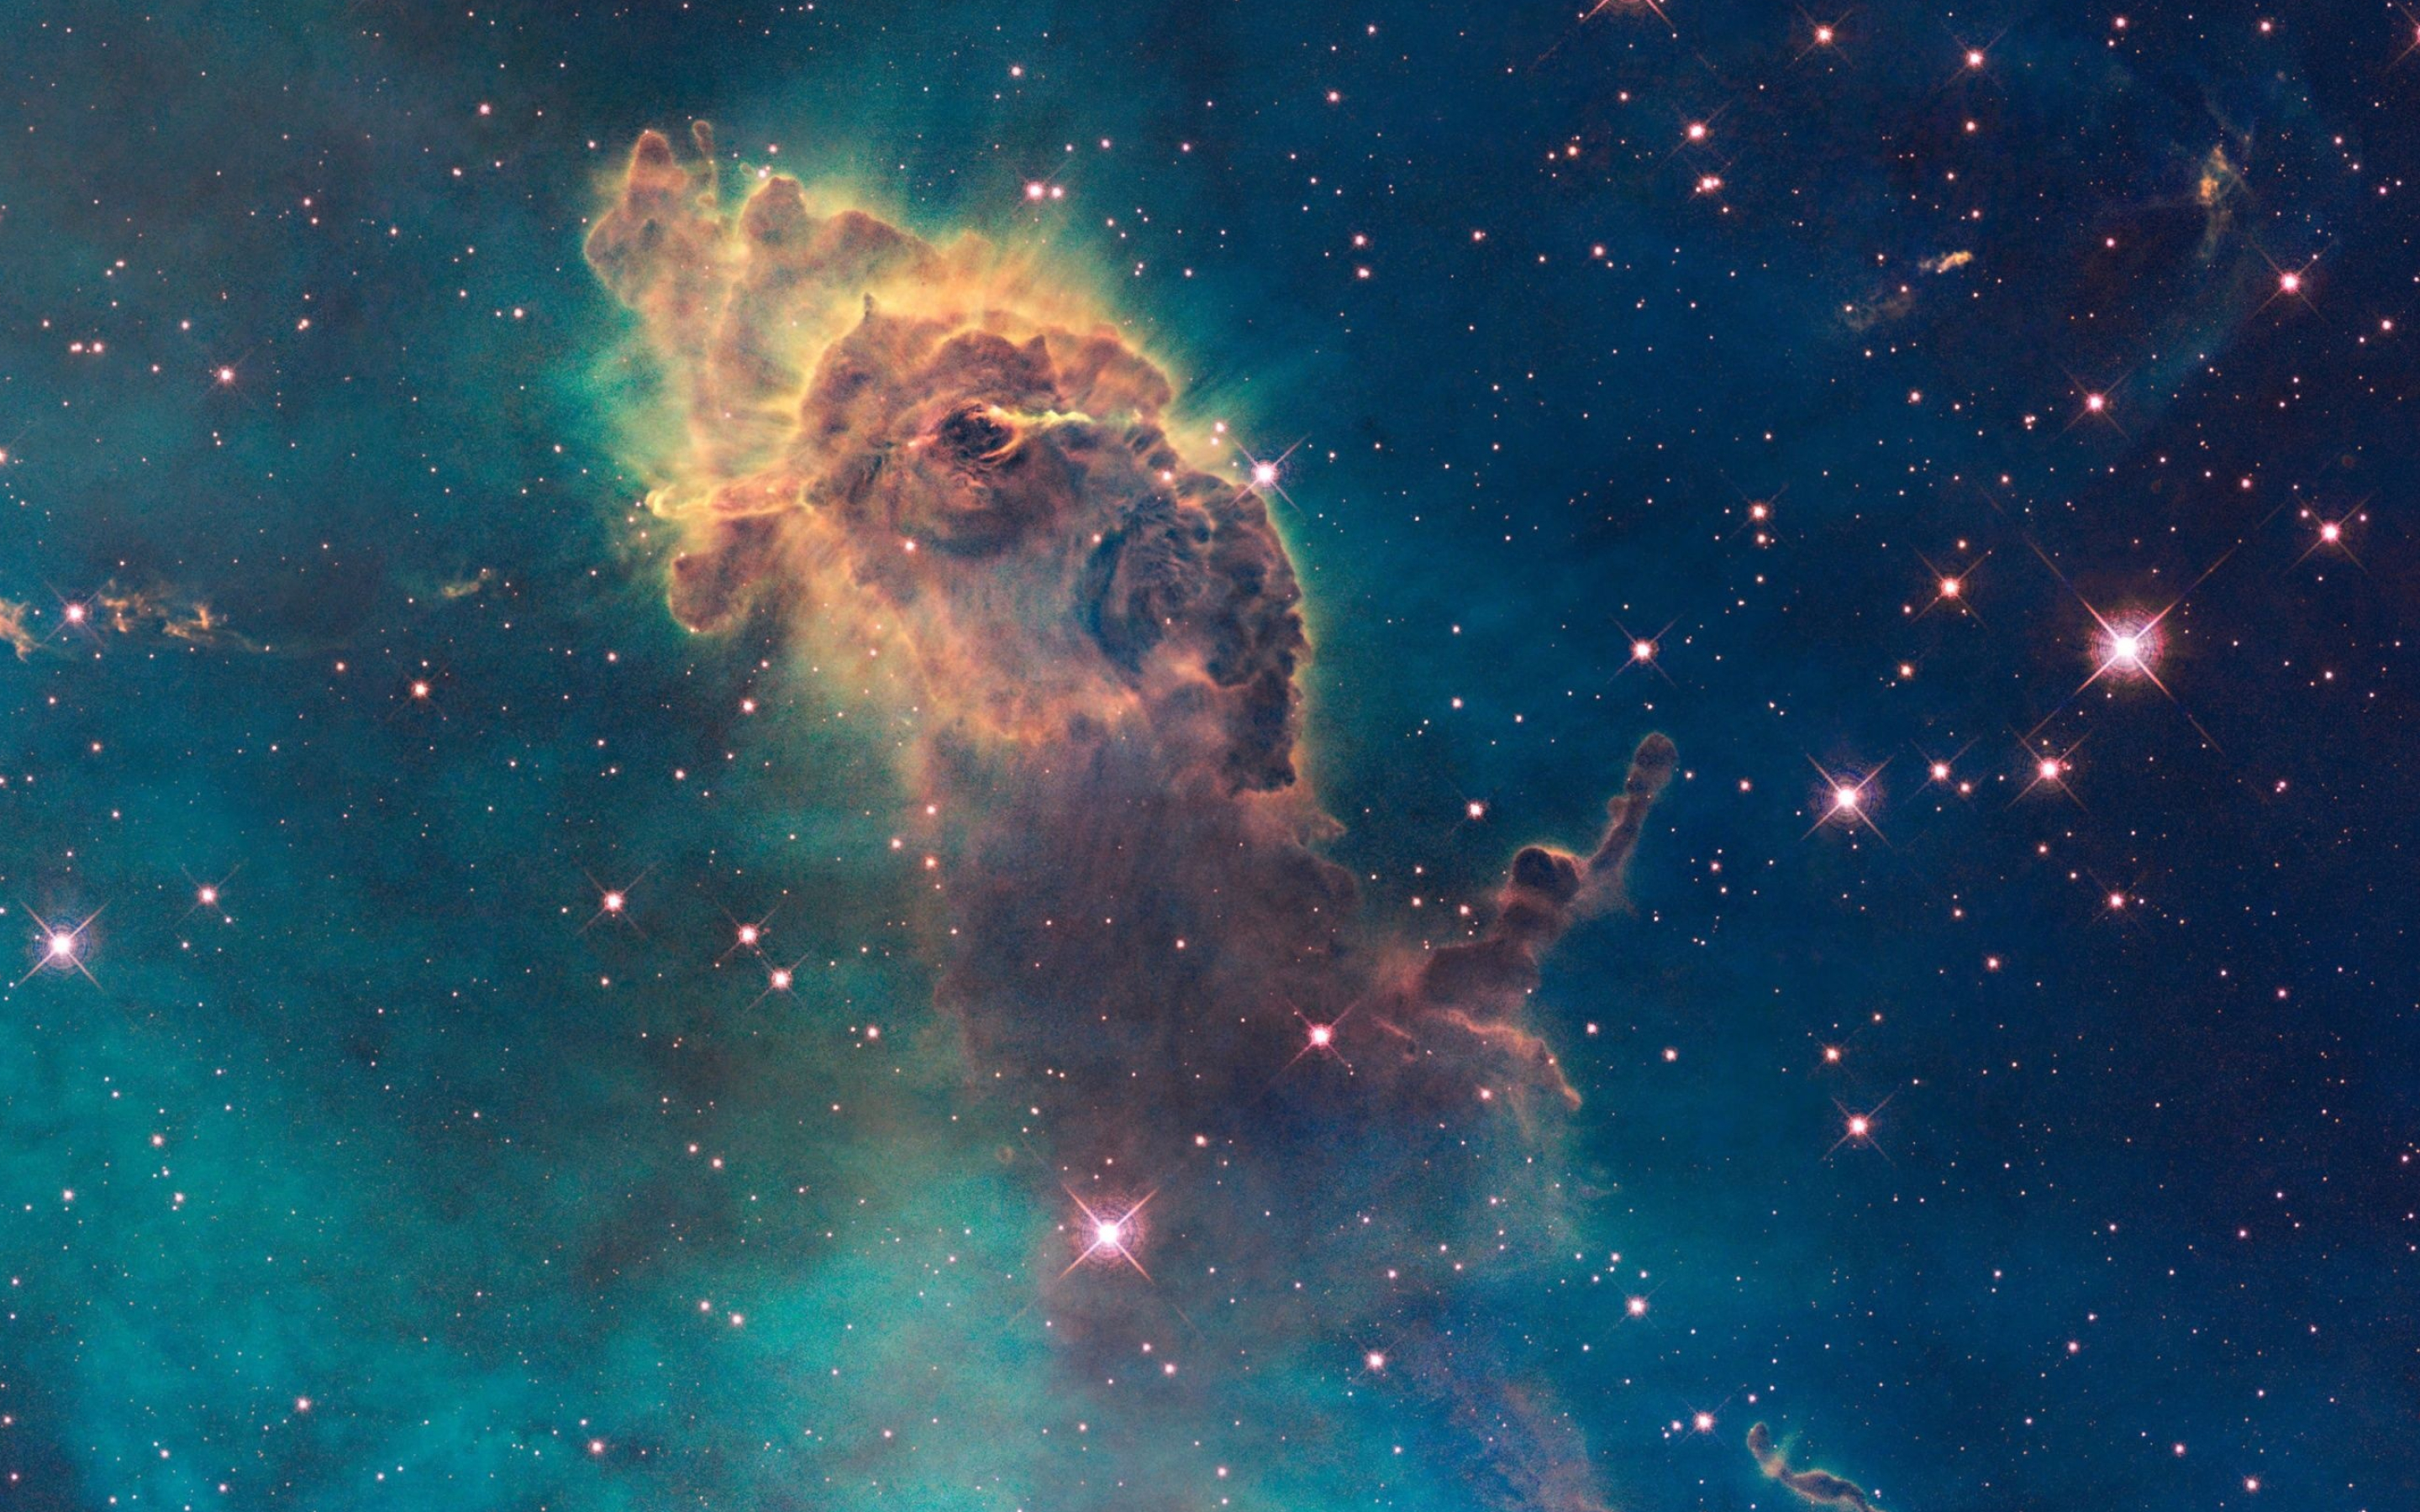 Hubble Space, 4K wide-screen wallpapers, Astronomical images, Deep space photography, 2880x1800 HD Desktop